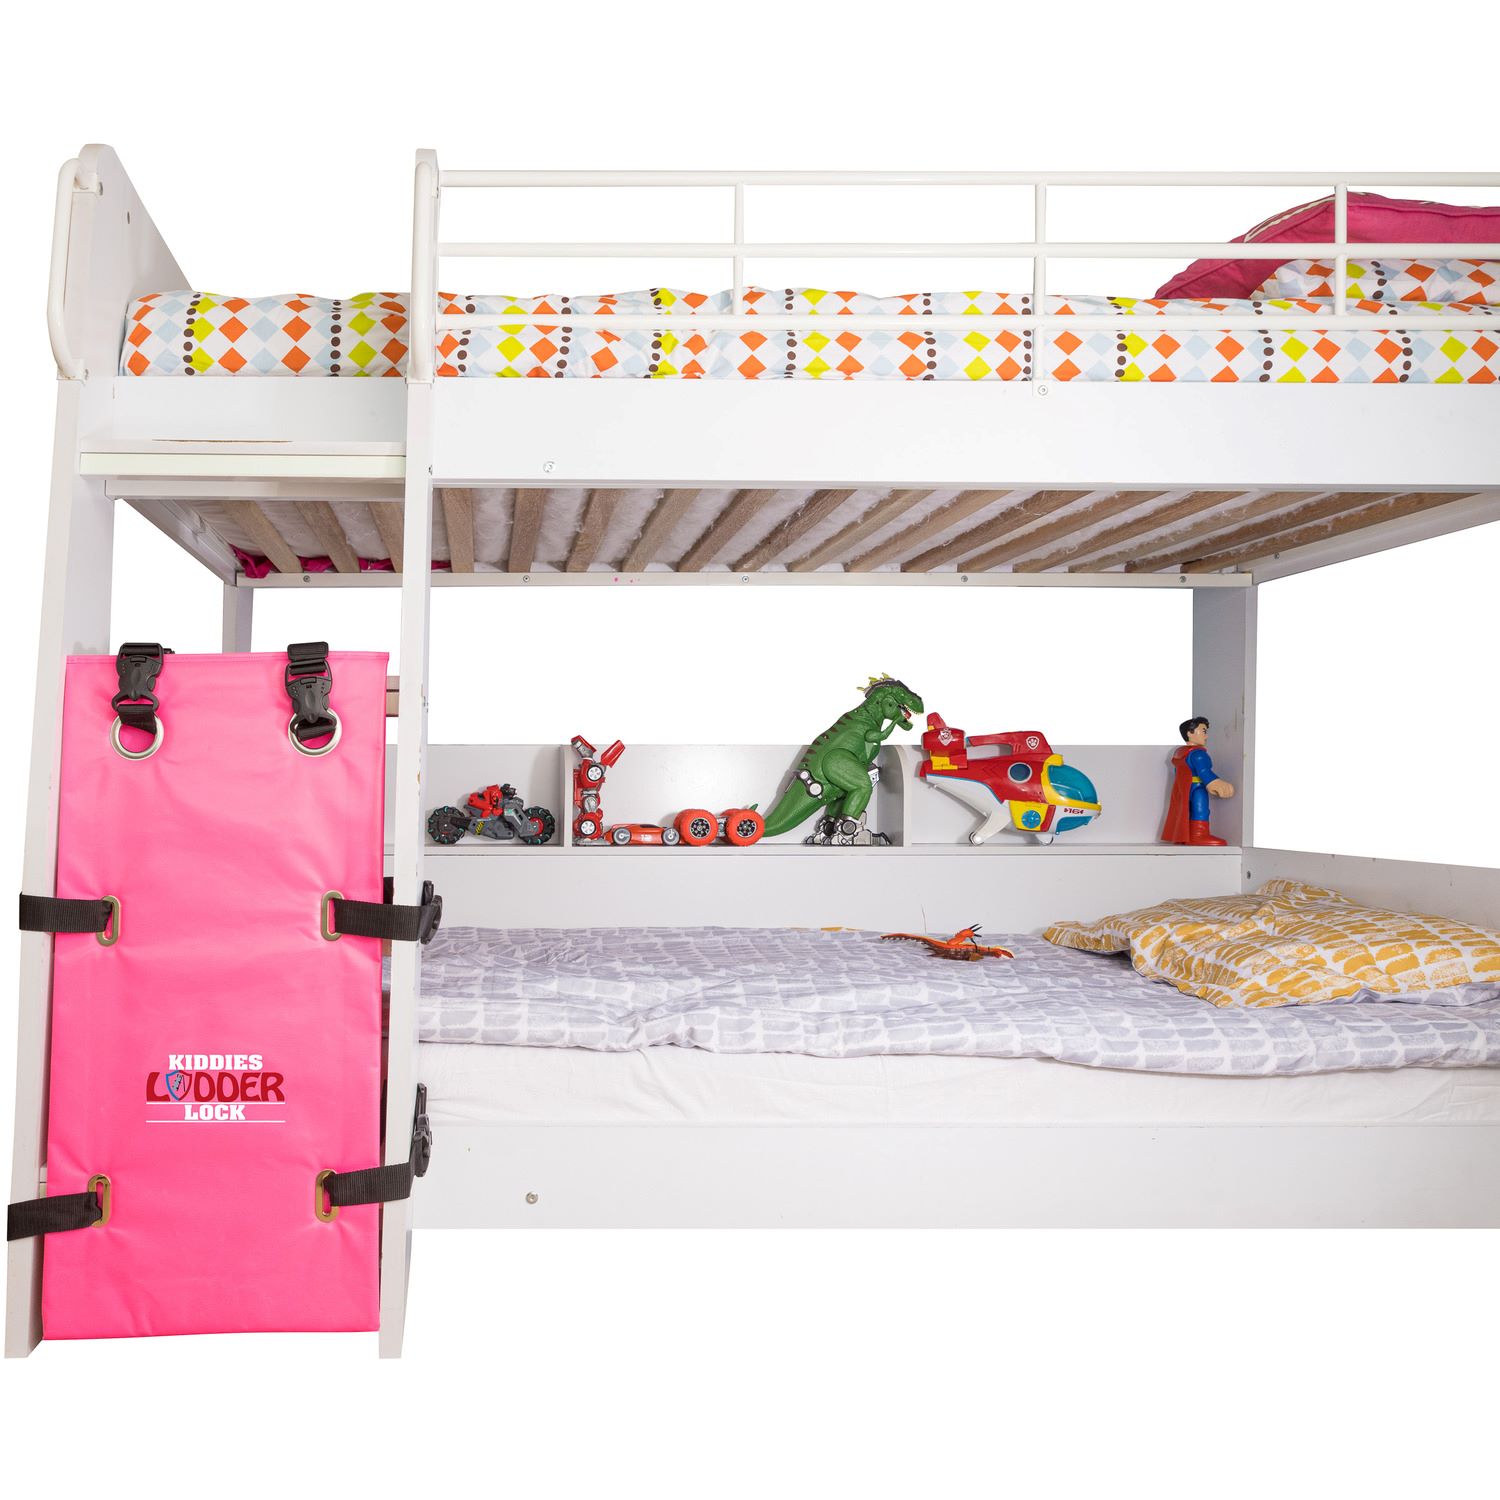 How To Childproof Loft Bed Ladder